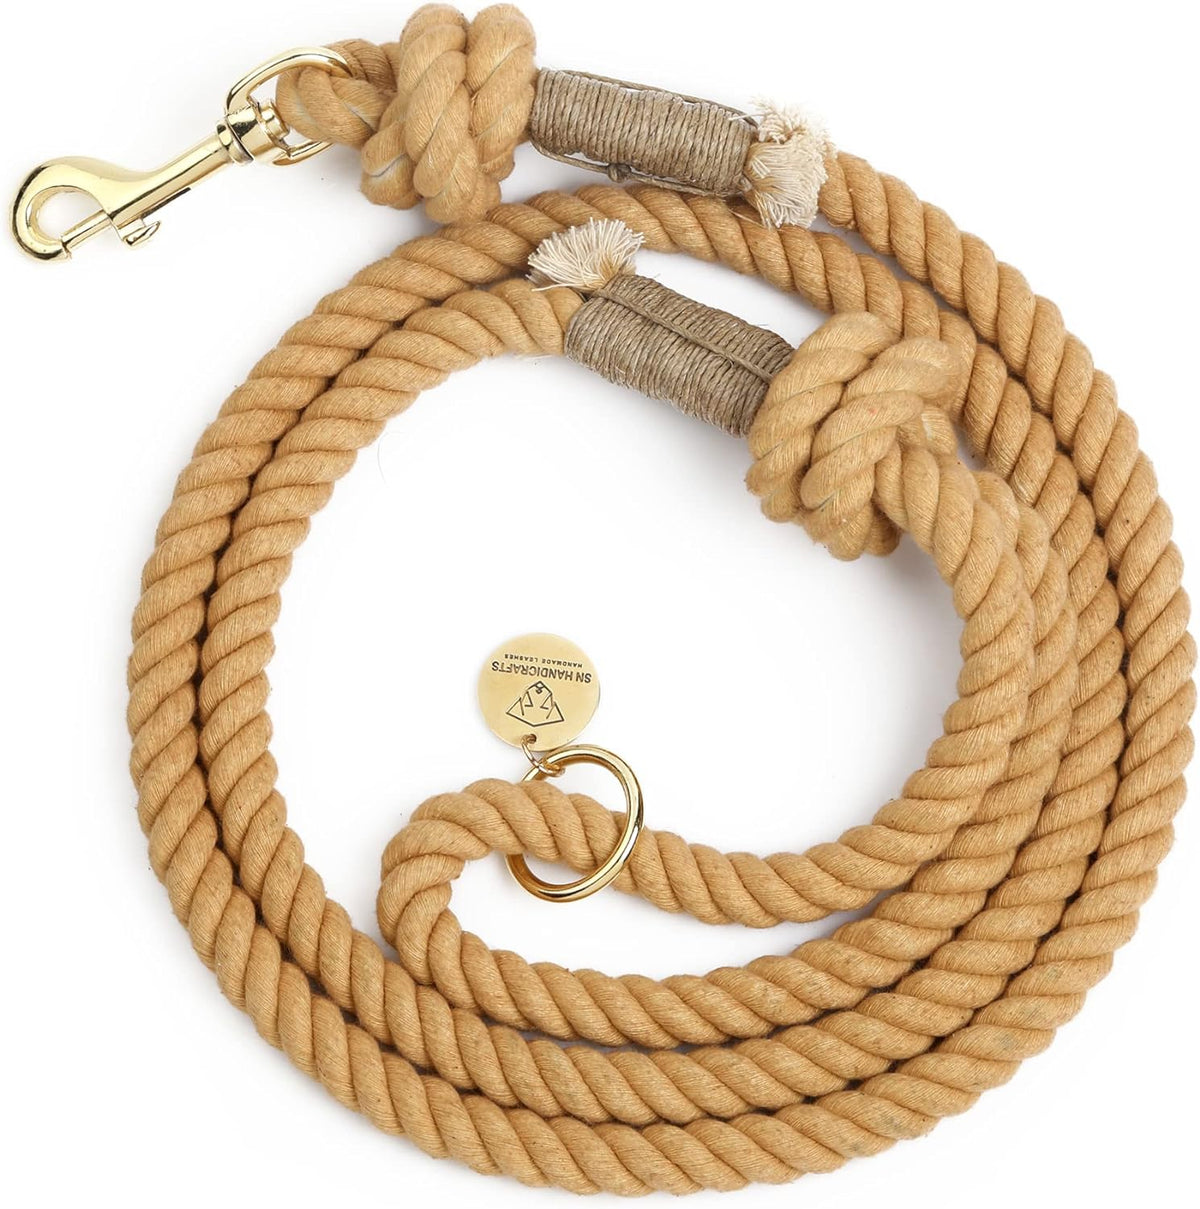 Caramel Handmade Rope Leashes for Dogs Rope Dog Leash Rope Cute Dog Leash Braided Dog Leash Cotton Rope Leash for Medium Dogs Large Dogs 5FT Organic Cotton